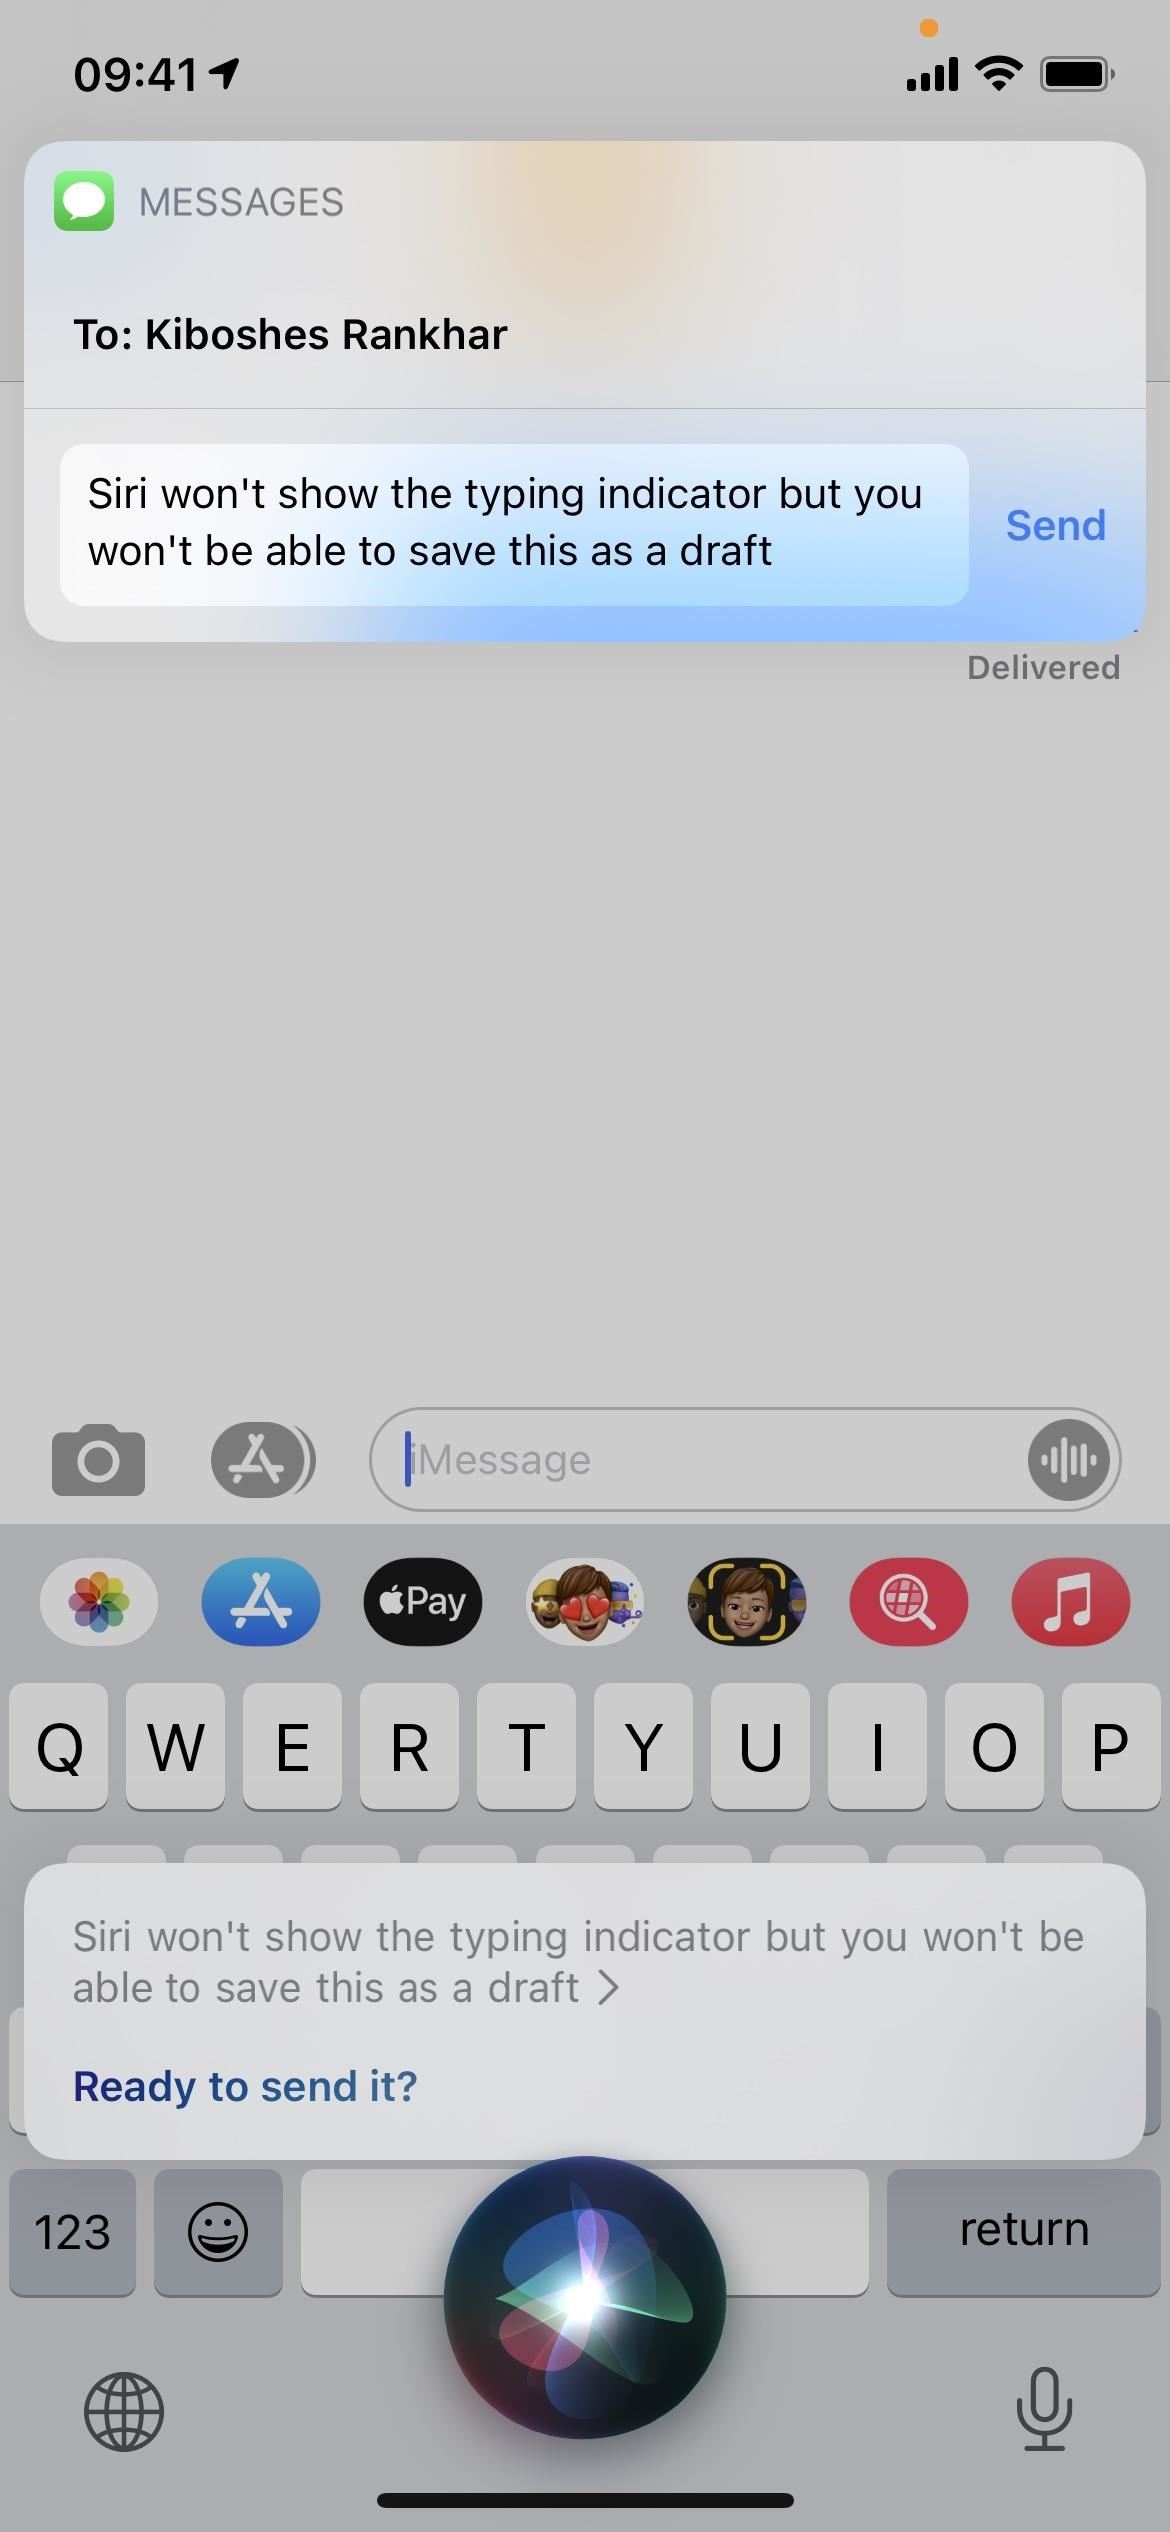 How to Disable the iMessage Typing Bubble Indicator So Others Don't Know You're Currently Active in the Chat